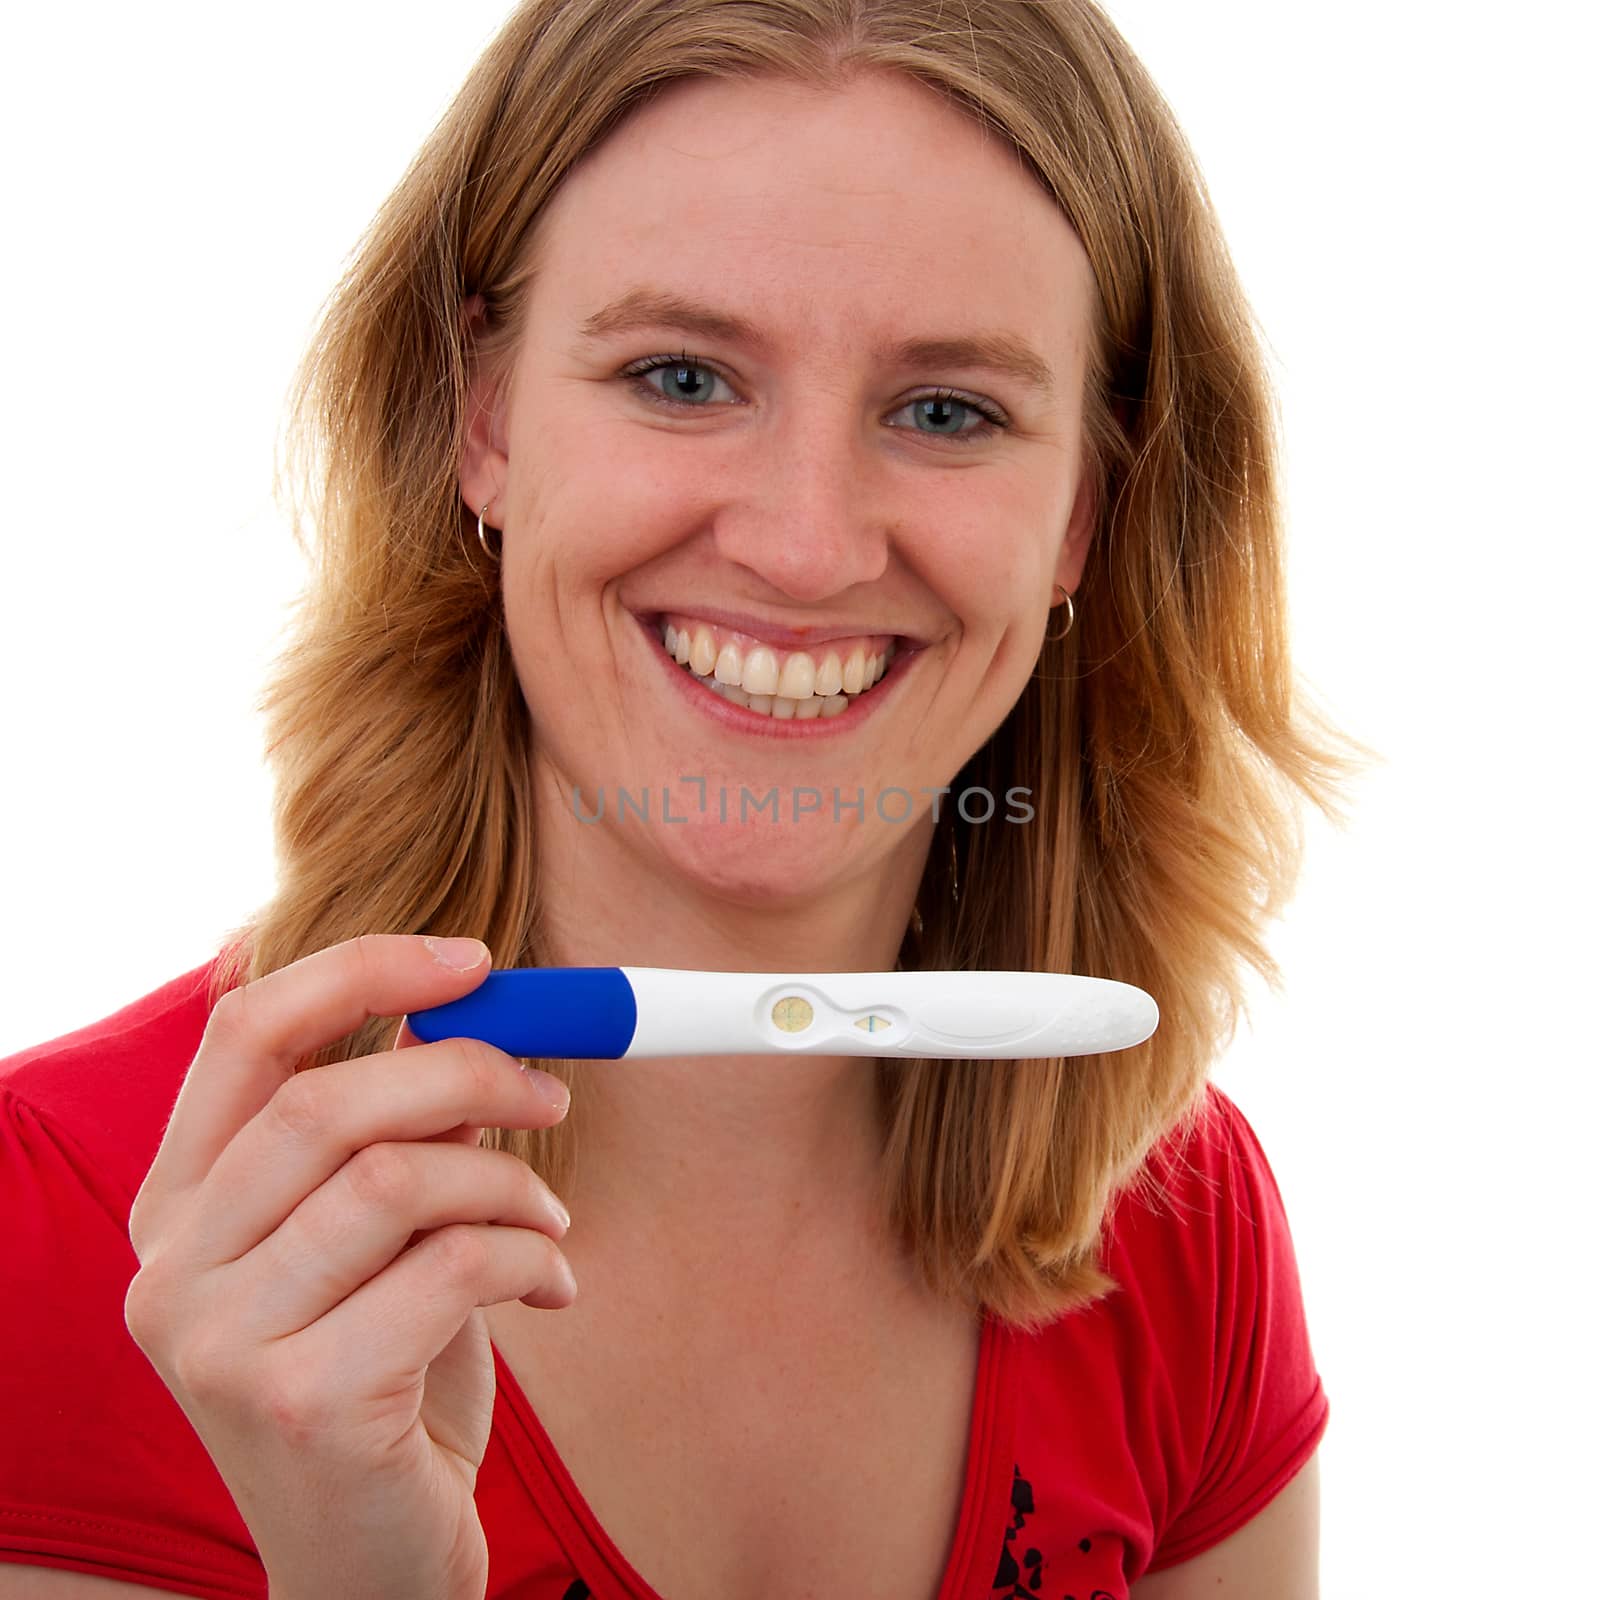 Woman with pregnancy tast is smiling because she is pregnant, over white background